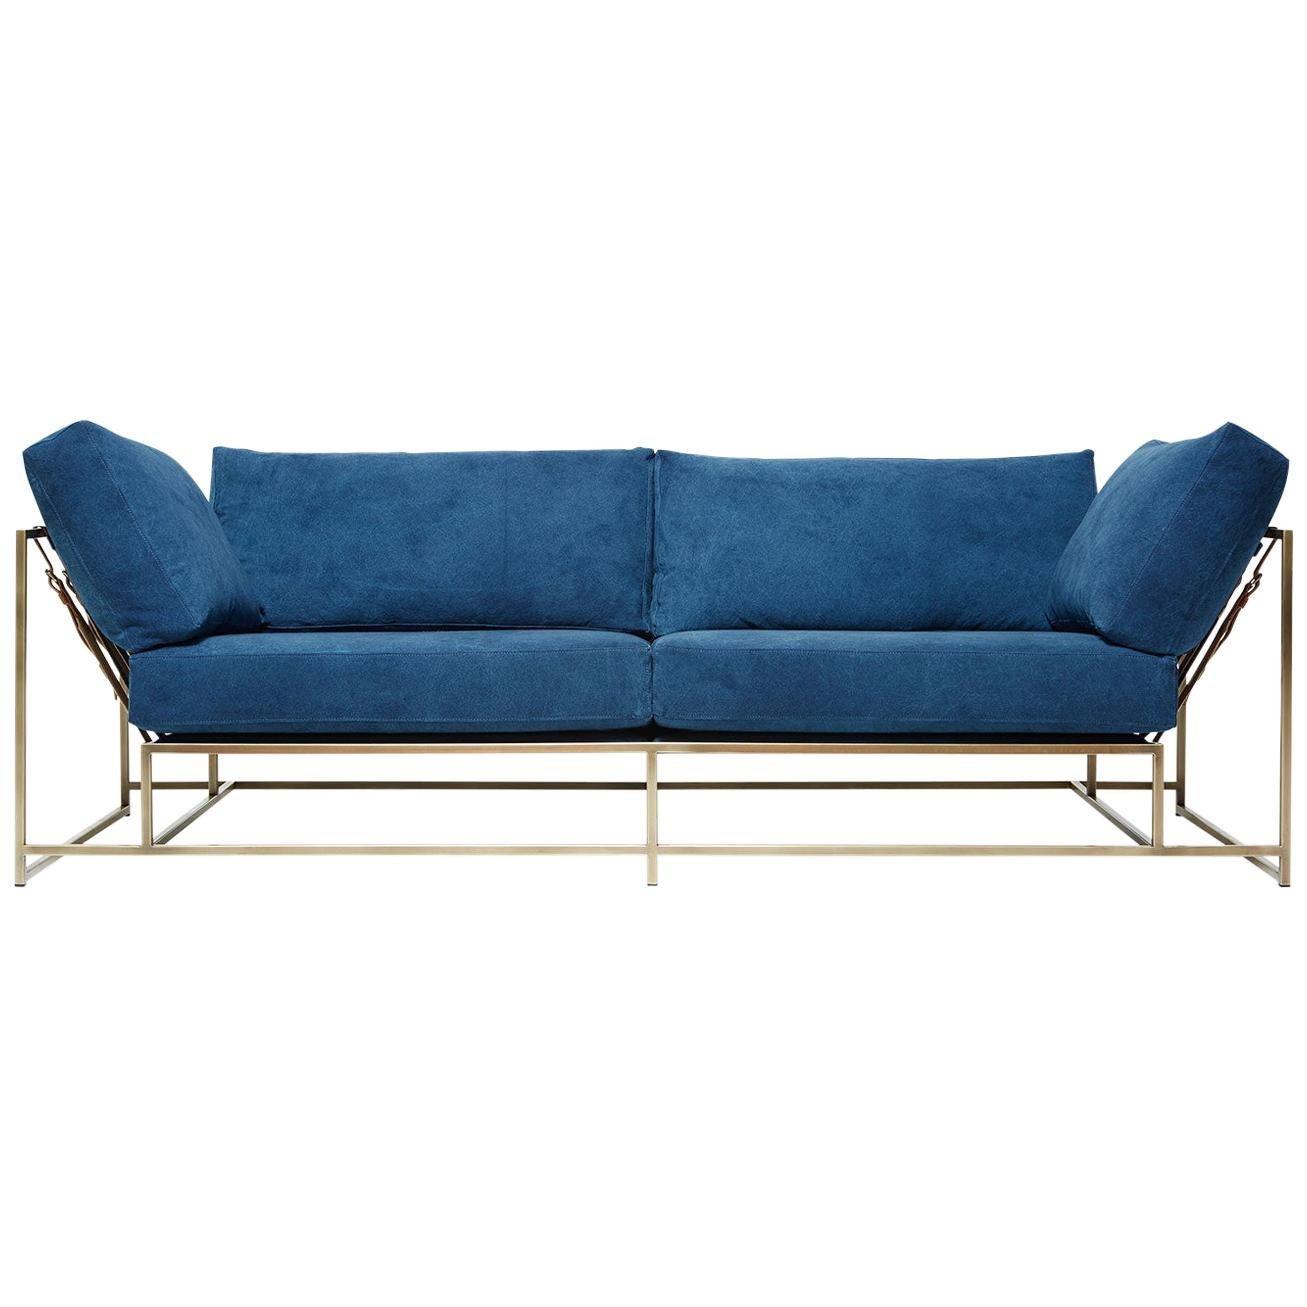 Hand-Dyed Indigo Canvas and Antique Brass Two-Seat Sofa For Sale